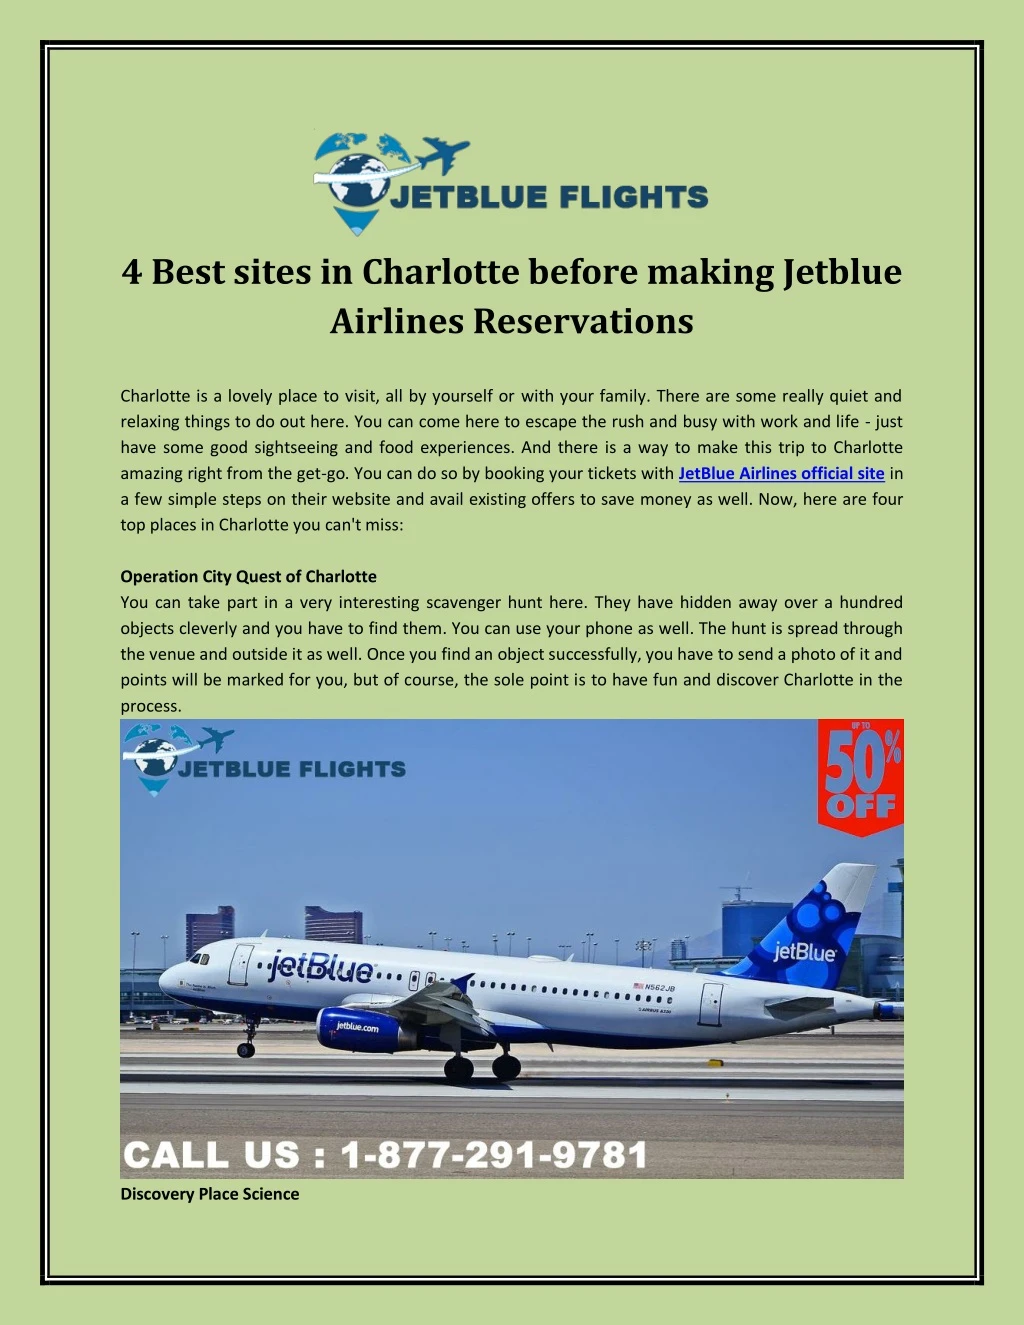 4 best sites in charlotte before making jetblue